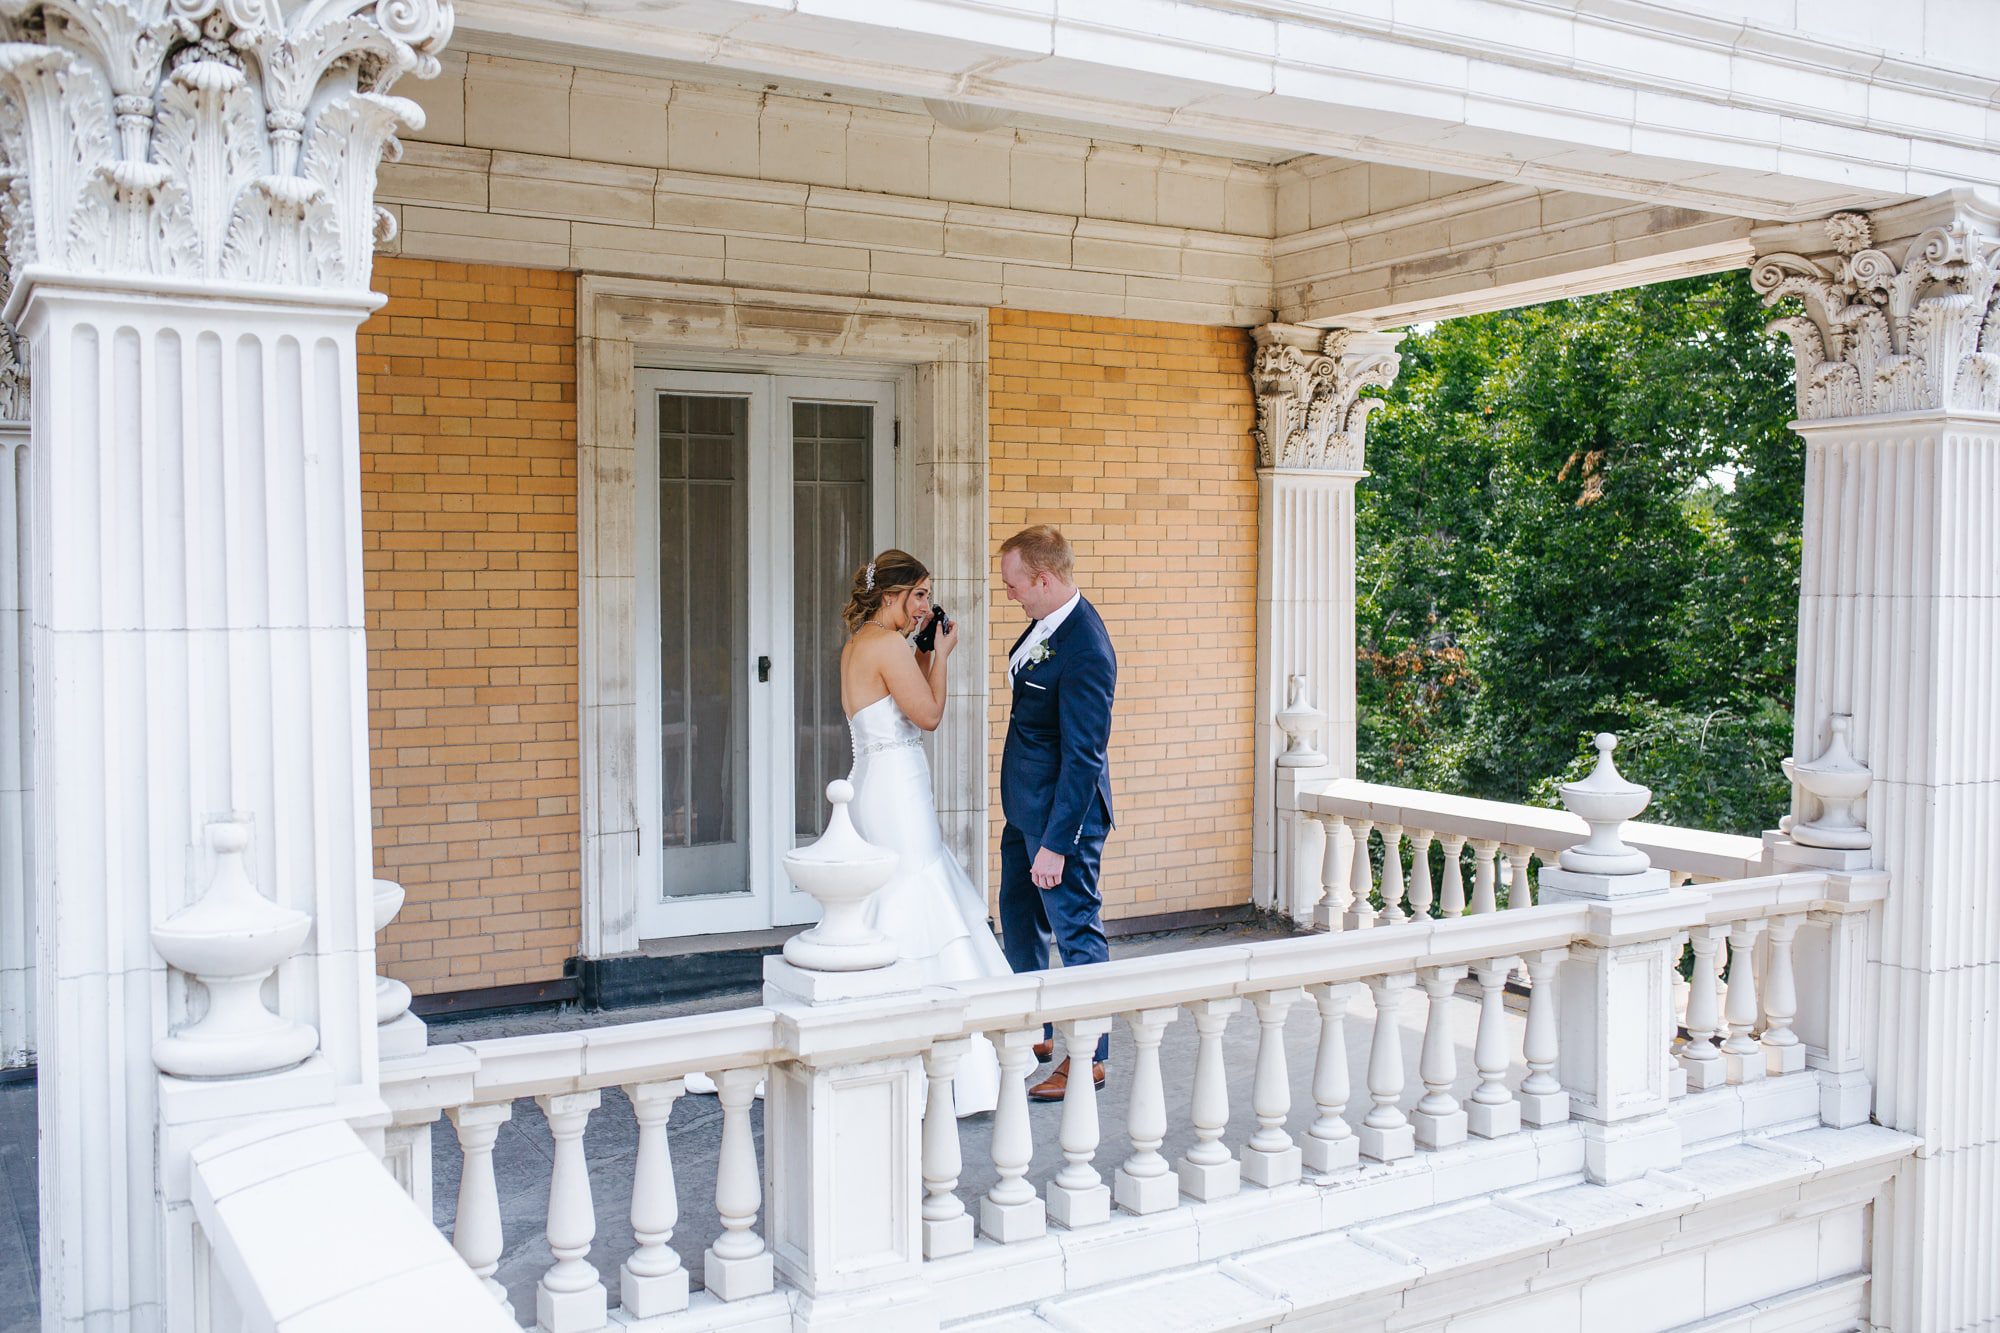 grant Humphreys mansion denver, grant Humphreys mansion, wedding first look, denver wedding, denver wedding photographer, first look locations, bride and groom first look, outdoor first look, should we do a first look wedding, first look pro con